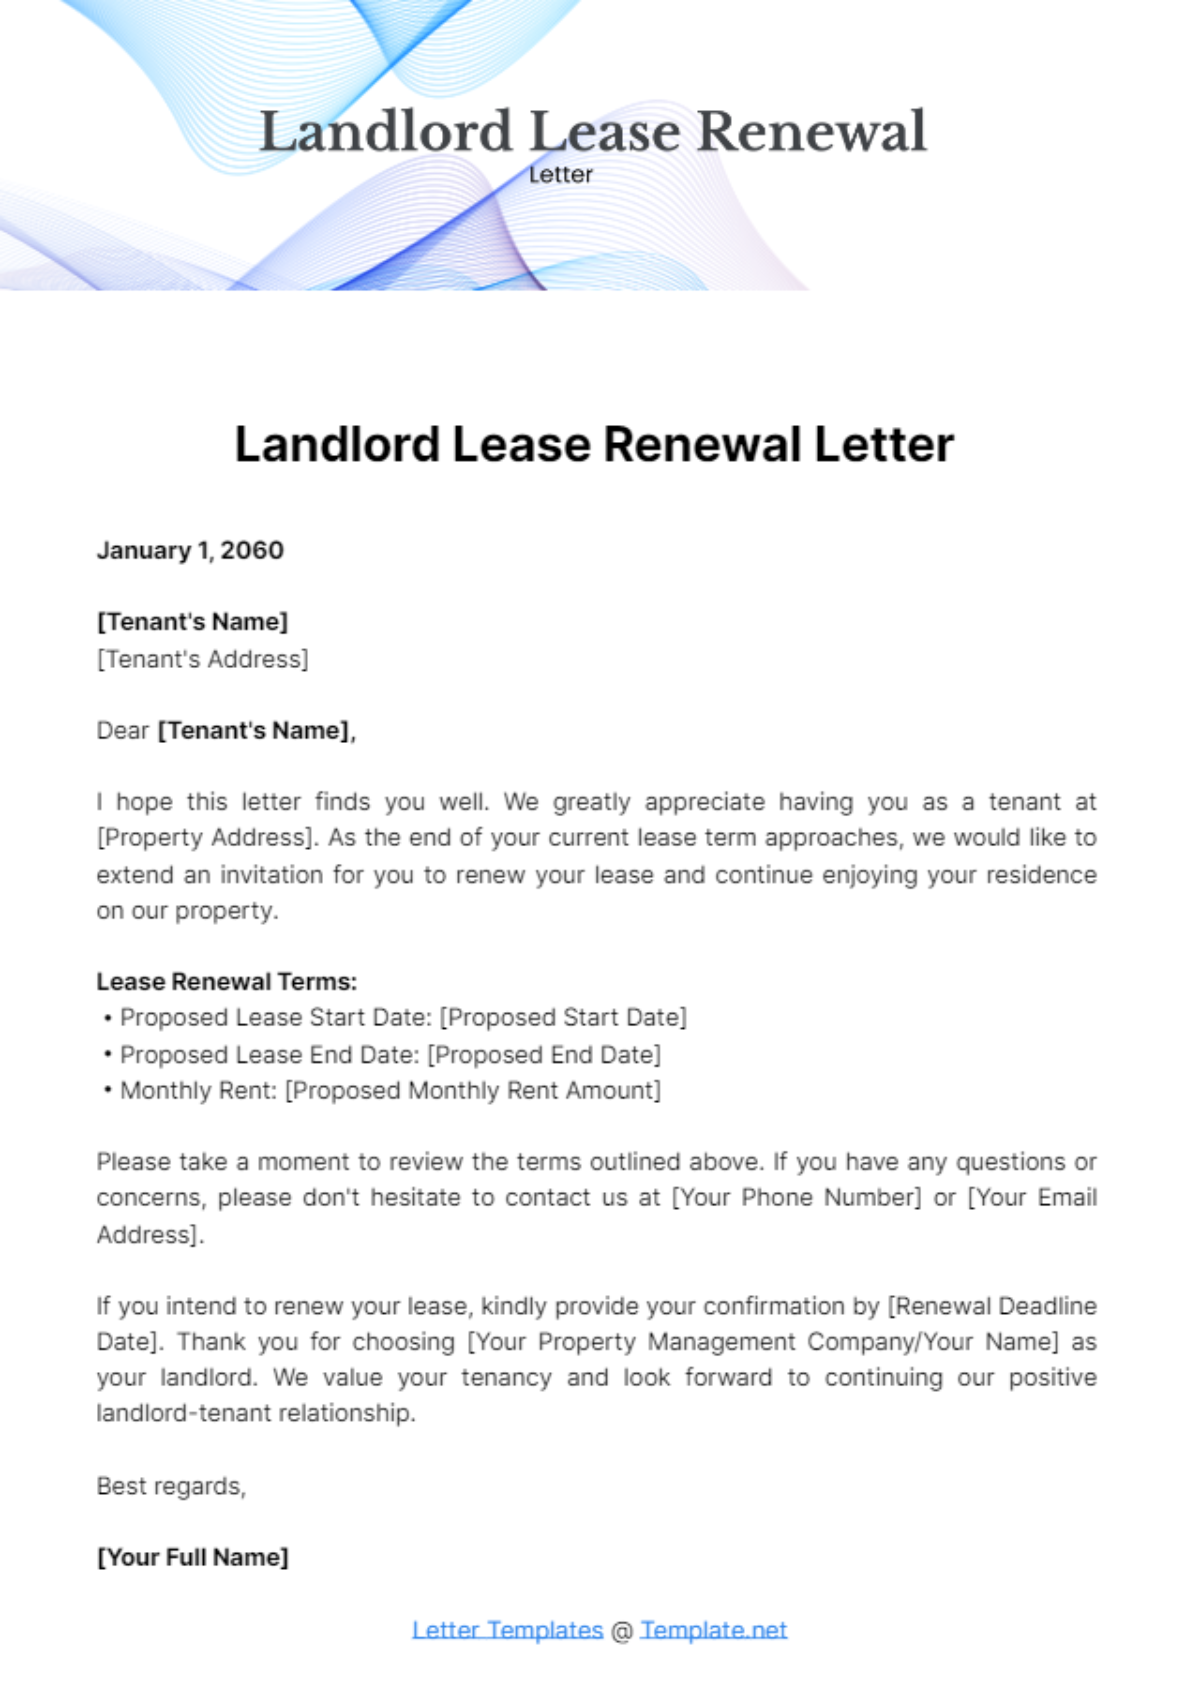 Free Landlord Lease Renewal Letter Template